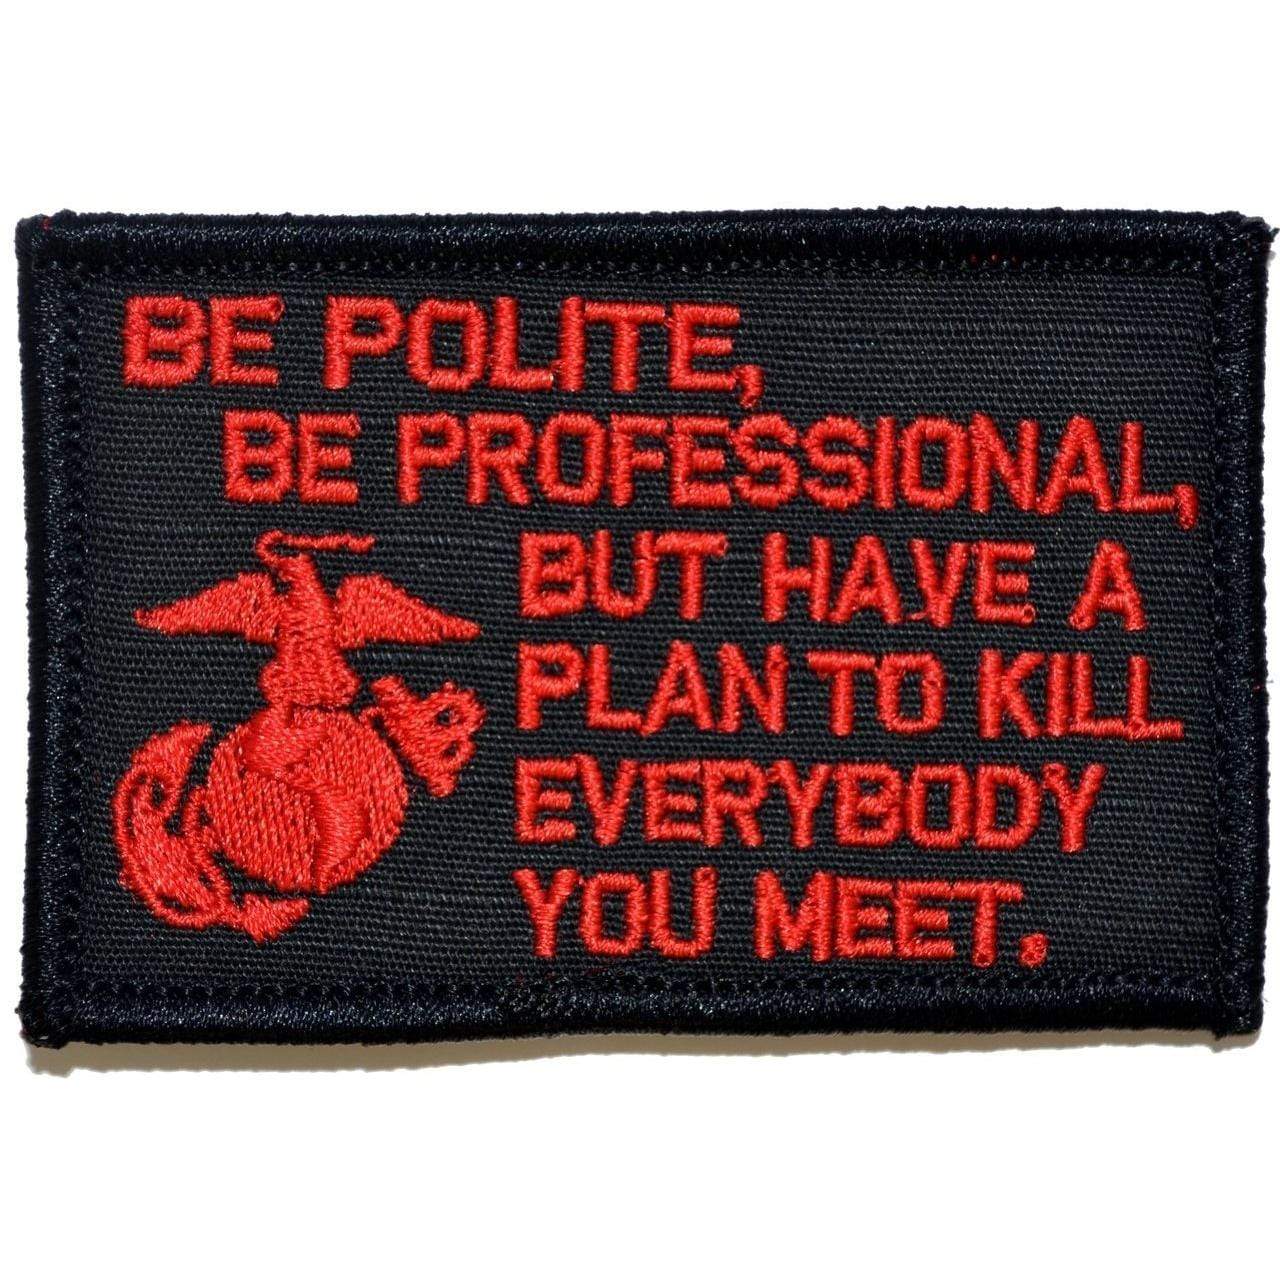 Tactical Gear Junkie Patches Black w/ Red Be Polite, Be Professional USMC Mattis Quote - 2x3 Patch